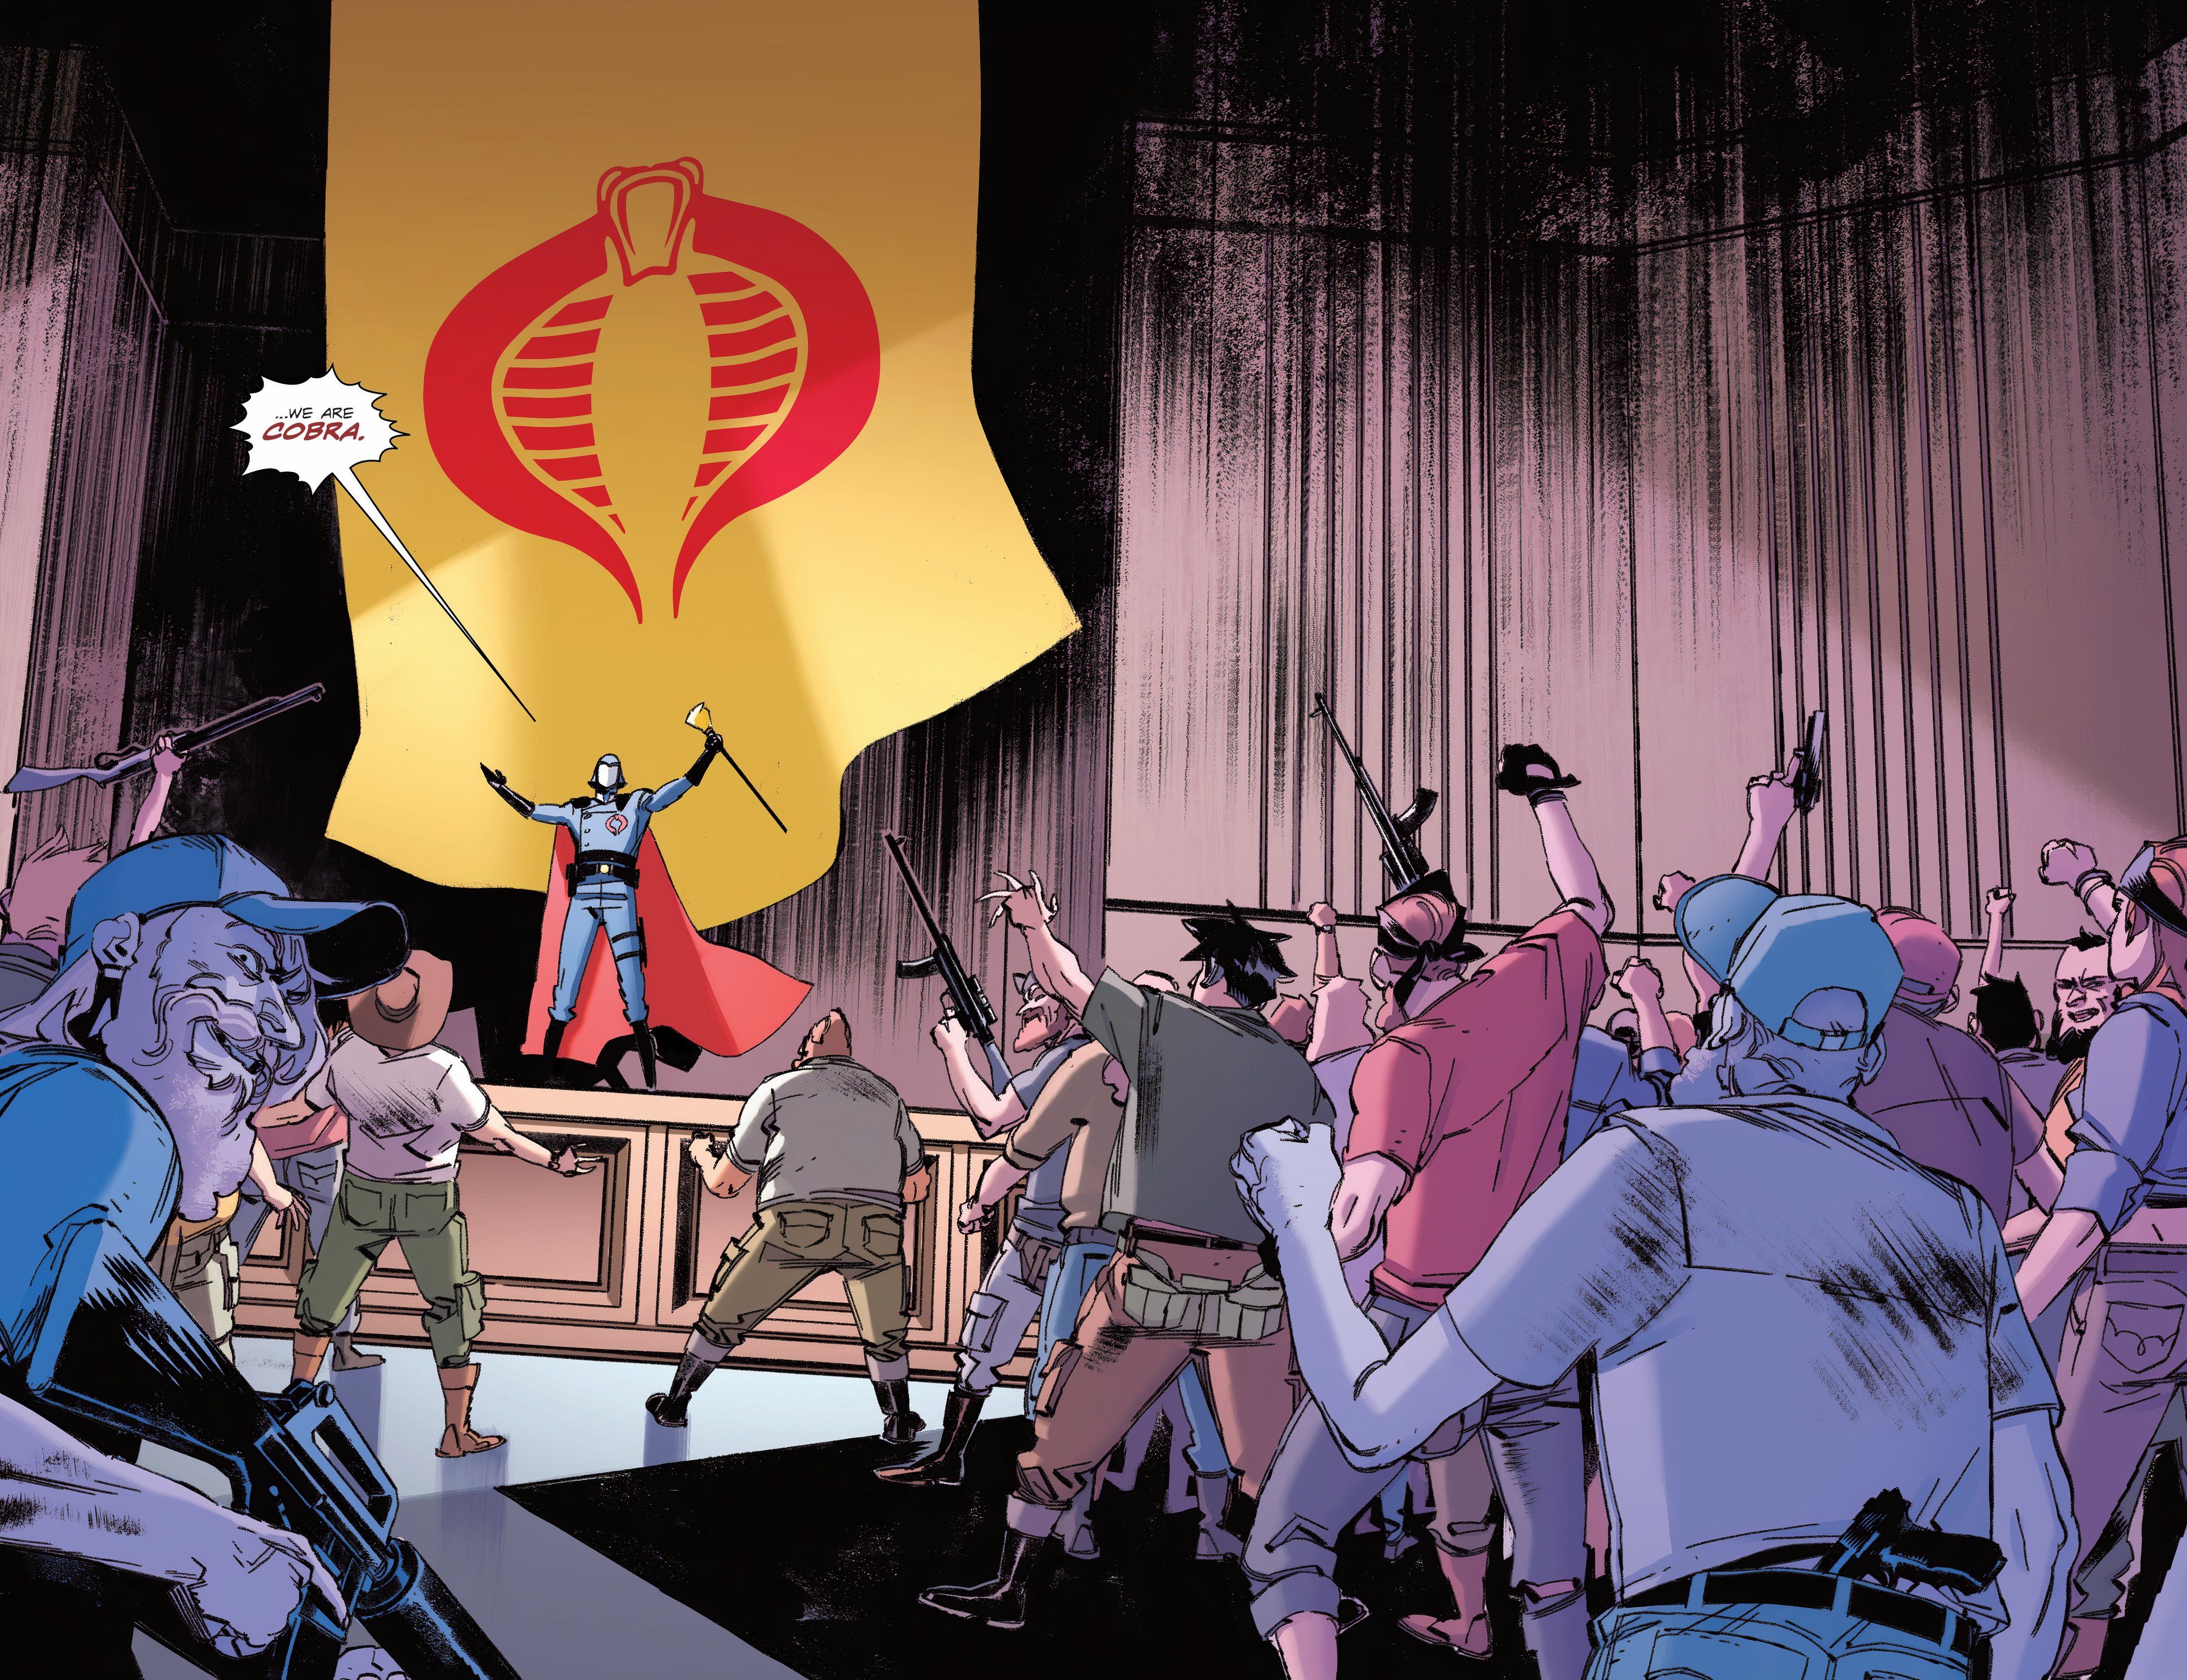 Cobra Commander #5, the birth of the Cobra organization, the Commander on stage speaking to crowd of villains.